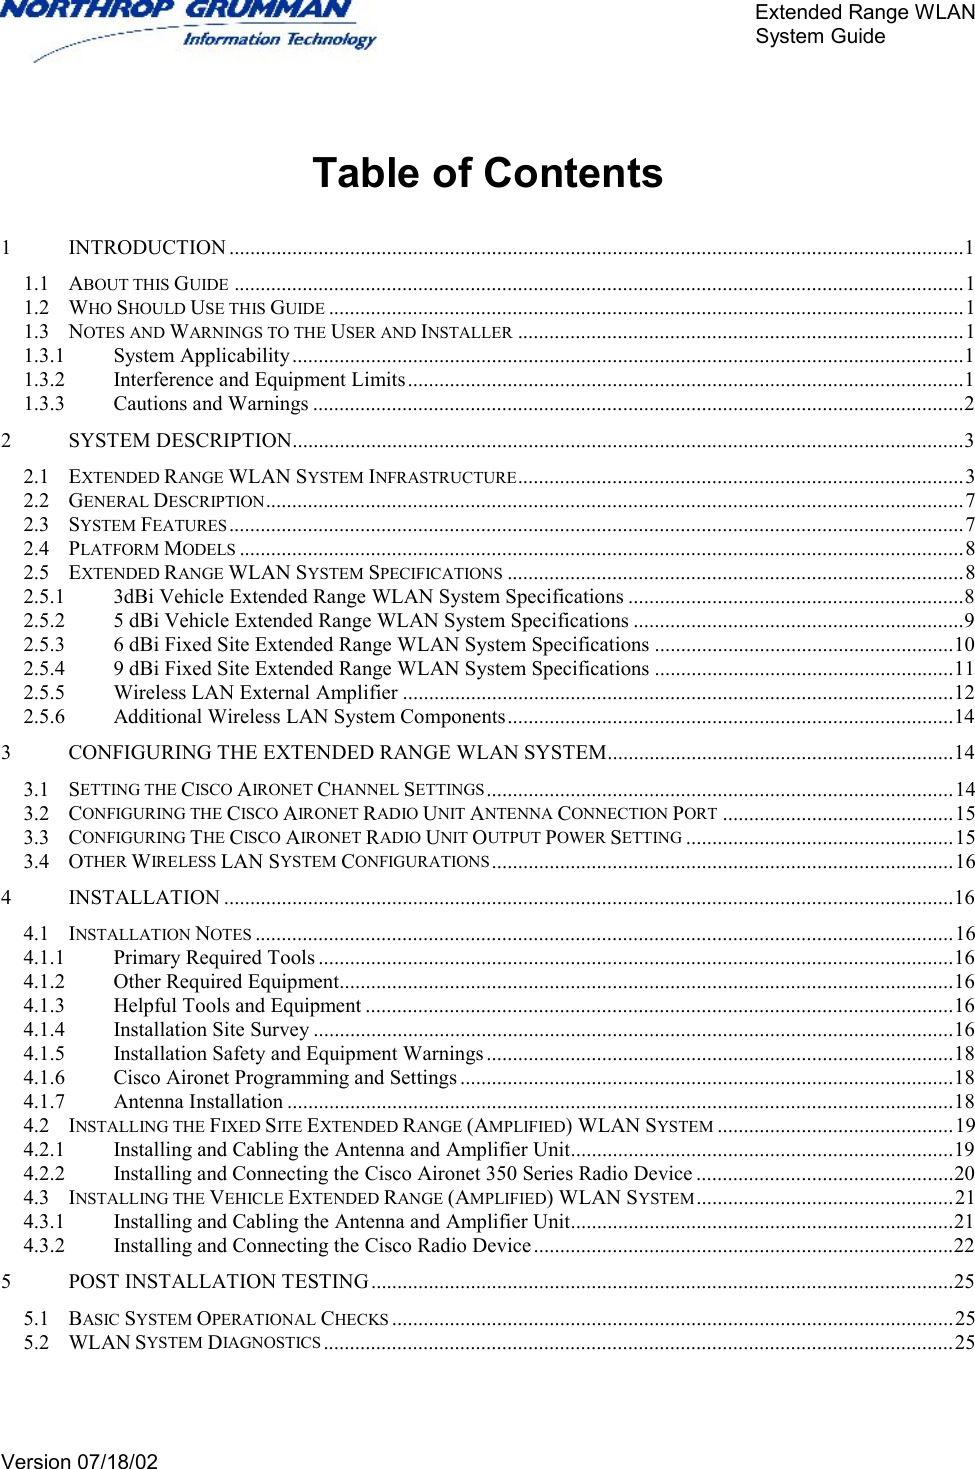       Extended Range WLAN                                                     System Guide     Version 07/18/02    Table of Contents  1 INTRODUCTION ............................................................................................................................................1 1.1 ABOUT THIS GUIDE ...........................................................................................................................................1 1.2 WHO SHOULD USE THIS GUIDE .........................................................................................................................1 1.3 NOTES AND WARNINGS TO THE USER AND INSTALLER .....................................................................................1 1.3.1 System Applicability................................................................................................................................1 1.3.2 Interference and Equipment Limits..........................................................................................................1 1.3.3 Cautions and Warnings ............................................................................................................................2 2 SYSTEM DESCRIPTION................................................................................................................................3 2.1 EXTENDED RANGE WLAN SYSTEM INFRASTRUCTURE.....................................................................................3 2.2 GENERAL DESCRIPTION.....................................................................................................................................7 2.3 SYSTEM FEATURES............................................................................................................................................7 2.4 PLATFORM MODELS ..........................................................................................................................................8 2.5 EXTENDED RANGE WLAN SYSTEM SPECIFICATIONS .......................................................................................8 2.5.1 3dBi Vehicle Extended Range WLAN System Specifications ................................................................8 2.5.2 5 dBi Vehicle Extended Range WLAN System Specifications ...............................................................9 2.5.3 6 dBi Fixed Site Extended Range WLAN System Specifications .........................................................10 2.5.4 9 dBi Fixed Site Extended Range WLAN System Specifications .........................................................11 2.5.5 Wireless LAN External Amplifier .........................................................................................................12 2.5.6 Additional Wireless LAN System Components.....................................................................................14 3 CONFIGURING THE EXTENDED RANGE WLAN SYSTEM..................................................................14 3.1 SETTING THE CISCO AIRONET CHANNEL SETTINGS.........................................................................................14 3.2 CONFIGURING THE CISCO AIRONET RADIO UNIT ANTENNA CONNECTION PORT ............................................15 3.3 CONFIGURING THE CISCO AIRONET RADIO UNIT OUTPUT POWER SETTING ...................................................15 3.4 OTHER WIRELESS LAN SYSTEM CONFIGURATIONS........................................................................................16 4 INSTALLATION ...........................................................................................................................................16 4.1 INSTALLATION NOTES .....................................................................................................................................16 4.1.1 Primary Required Tools .........................................................................................................................16 4.1.2 Other Required Equipment.....................................................................................................................16 4.1.3 Helpful Tools and Equipment ................................................................................................................16 4.1.4 Installation Site Survey ..........................................................................................................................16 4.1.5 Installation Safety and Equipment Warnings .........................................................................................18 4.1.6 Cisco Aironet Programming and Settings ..............................................................................................18 4.1.7 Antenna Installation ...............................................................................................................................18 4.2 INSTALLING THE FIXED SITE EXTENDED RANGE (AMPLIFIED) WLAN SYSTEM .............................................19 4.2.1 Installing and Cabling the Antenna and Amplifier Unit.........................................................................19 4.2.2 Installing and Connecting the Cisco Aironet 350 Series Radio Device .................................................20 4.3 INSTALLING THE VEHICLE EXTENDED RANGE (AMPLIFIED) WLAN SYSTEM.................................................21 4.3.1 Installing and Cabling the Antenna and Amplifier Unit.........................................................................21 4.3.2 Installing and Connecting the Cisco Radio Device................................................................................22 5 POST INSTALLATION TESTING...............................................................................................................25 5.1 BASIC SYSTEM OPERATIONAL CHECKS ...........................................................................................................25 5.2 WLAN SYSTEM DIAGNOSTICS ........................................................................................................................25    